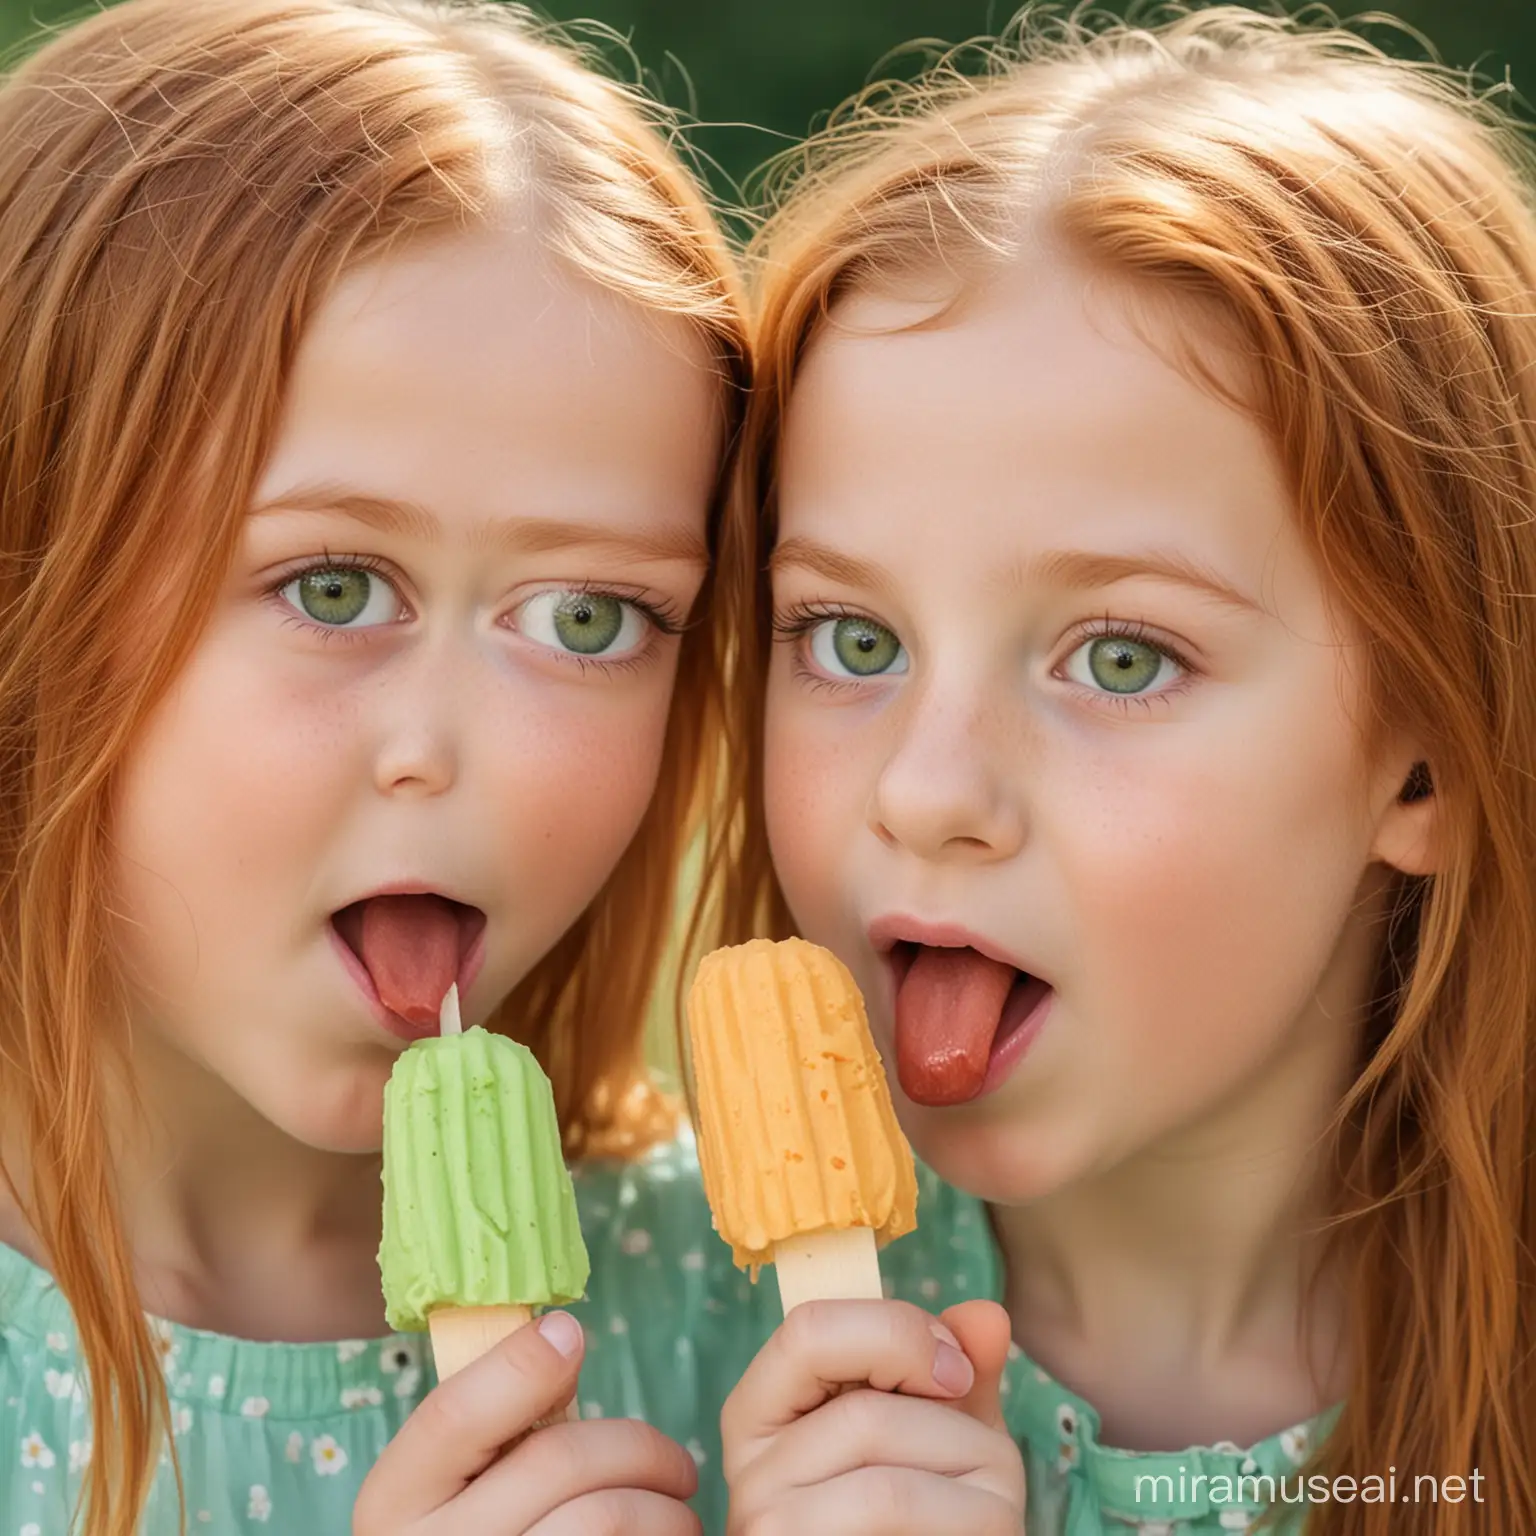 two little girls with green eyes and ginger hair licking one ice lolly between them